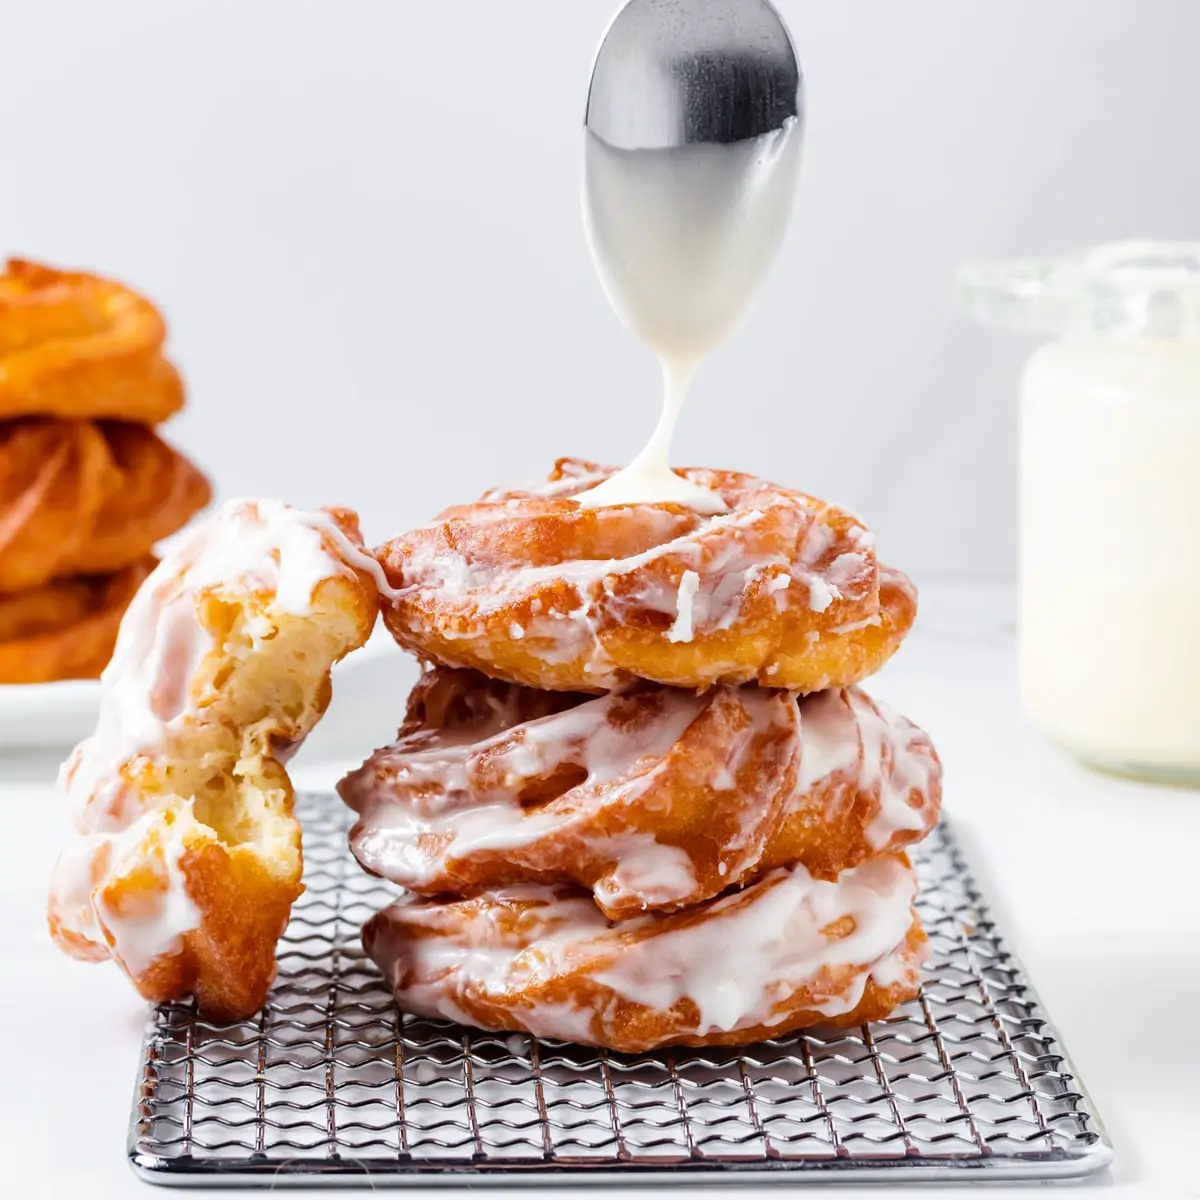 Adding glaze to cruller donuts